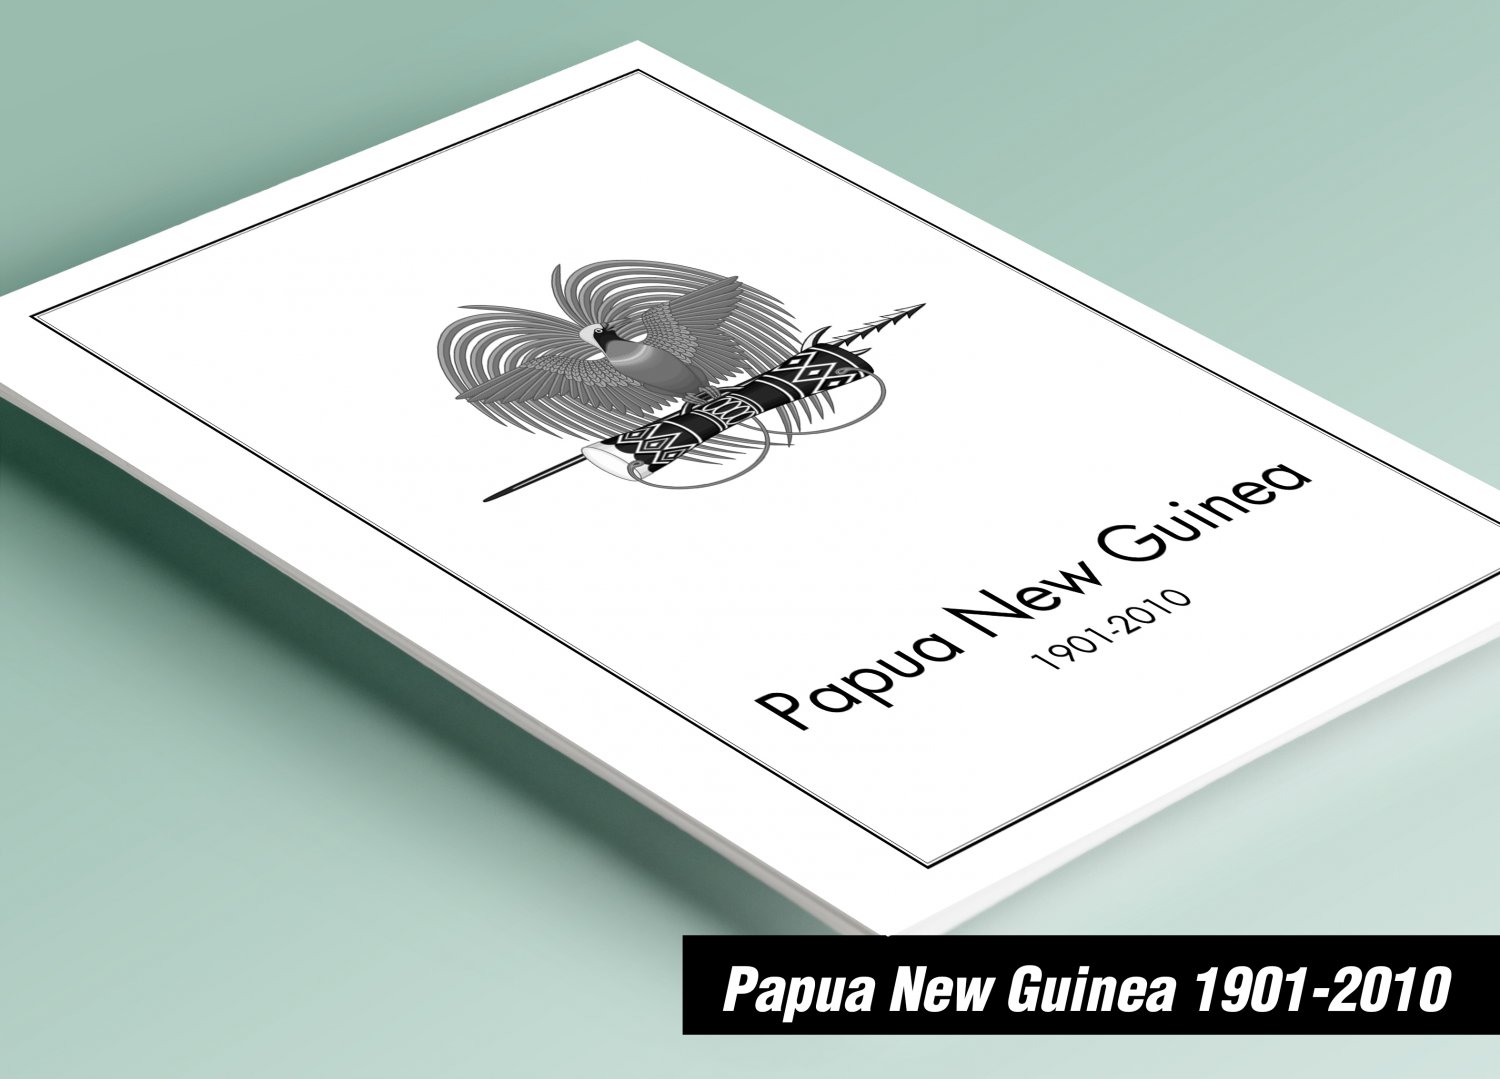 PRINTED PAPUA NEW GUINEA 1901-2010 STAMP ALBUM PAGES (221 pages)